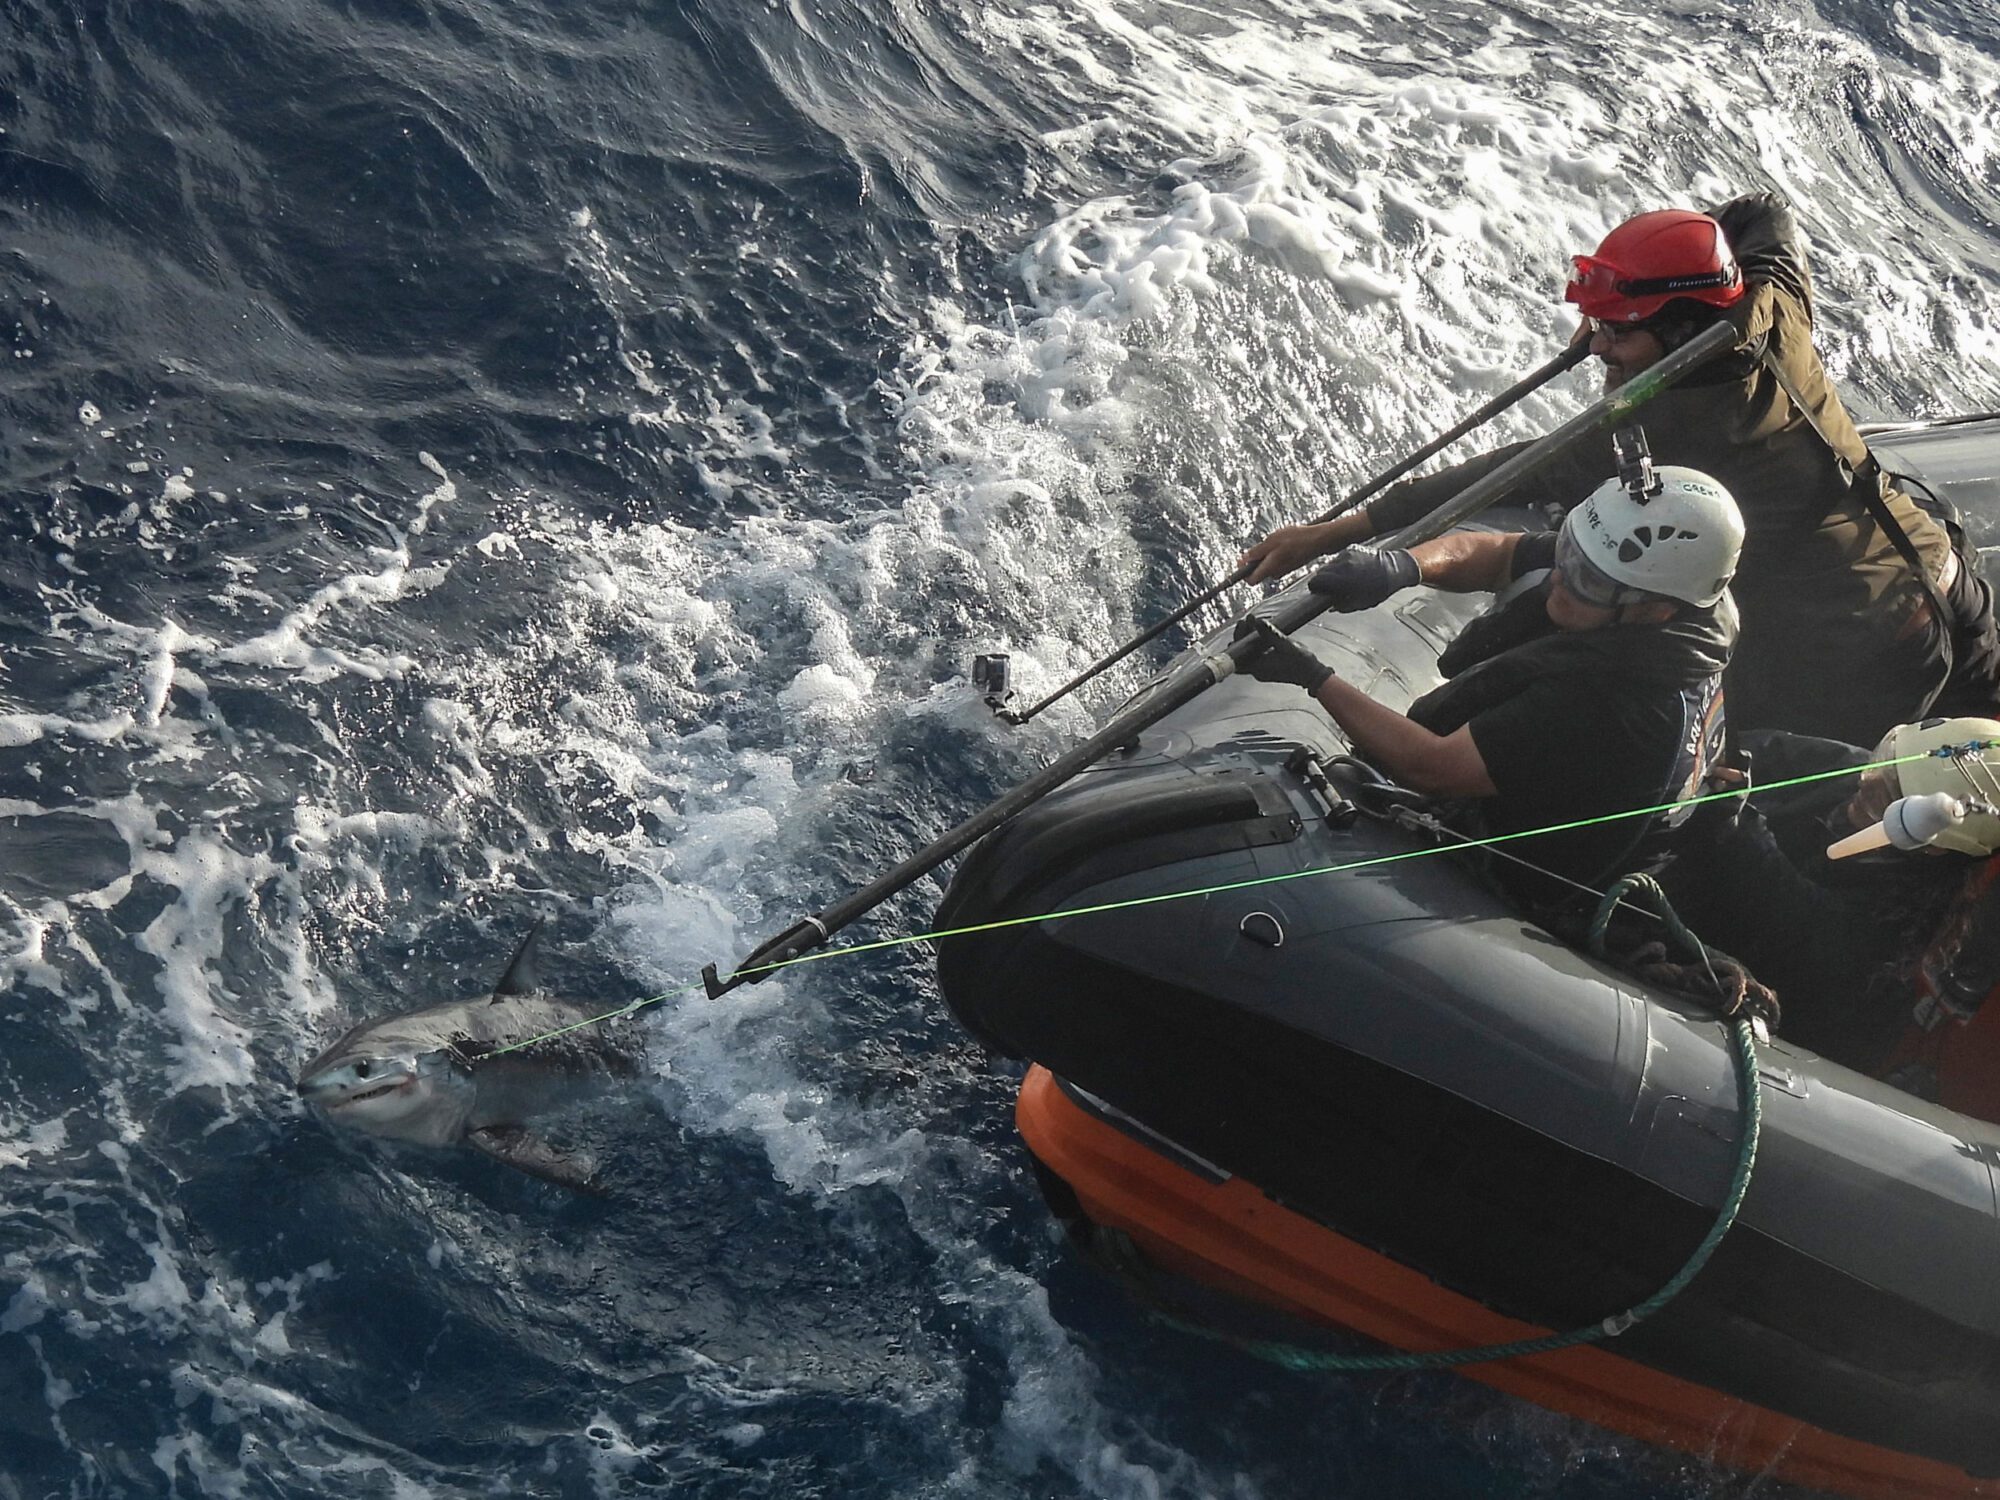 A couple of activists in an inflatable boat pull fishing lines from bubbly ocean waves.